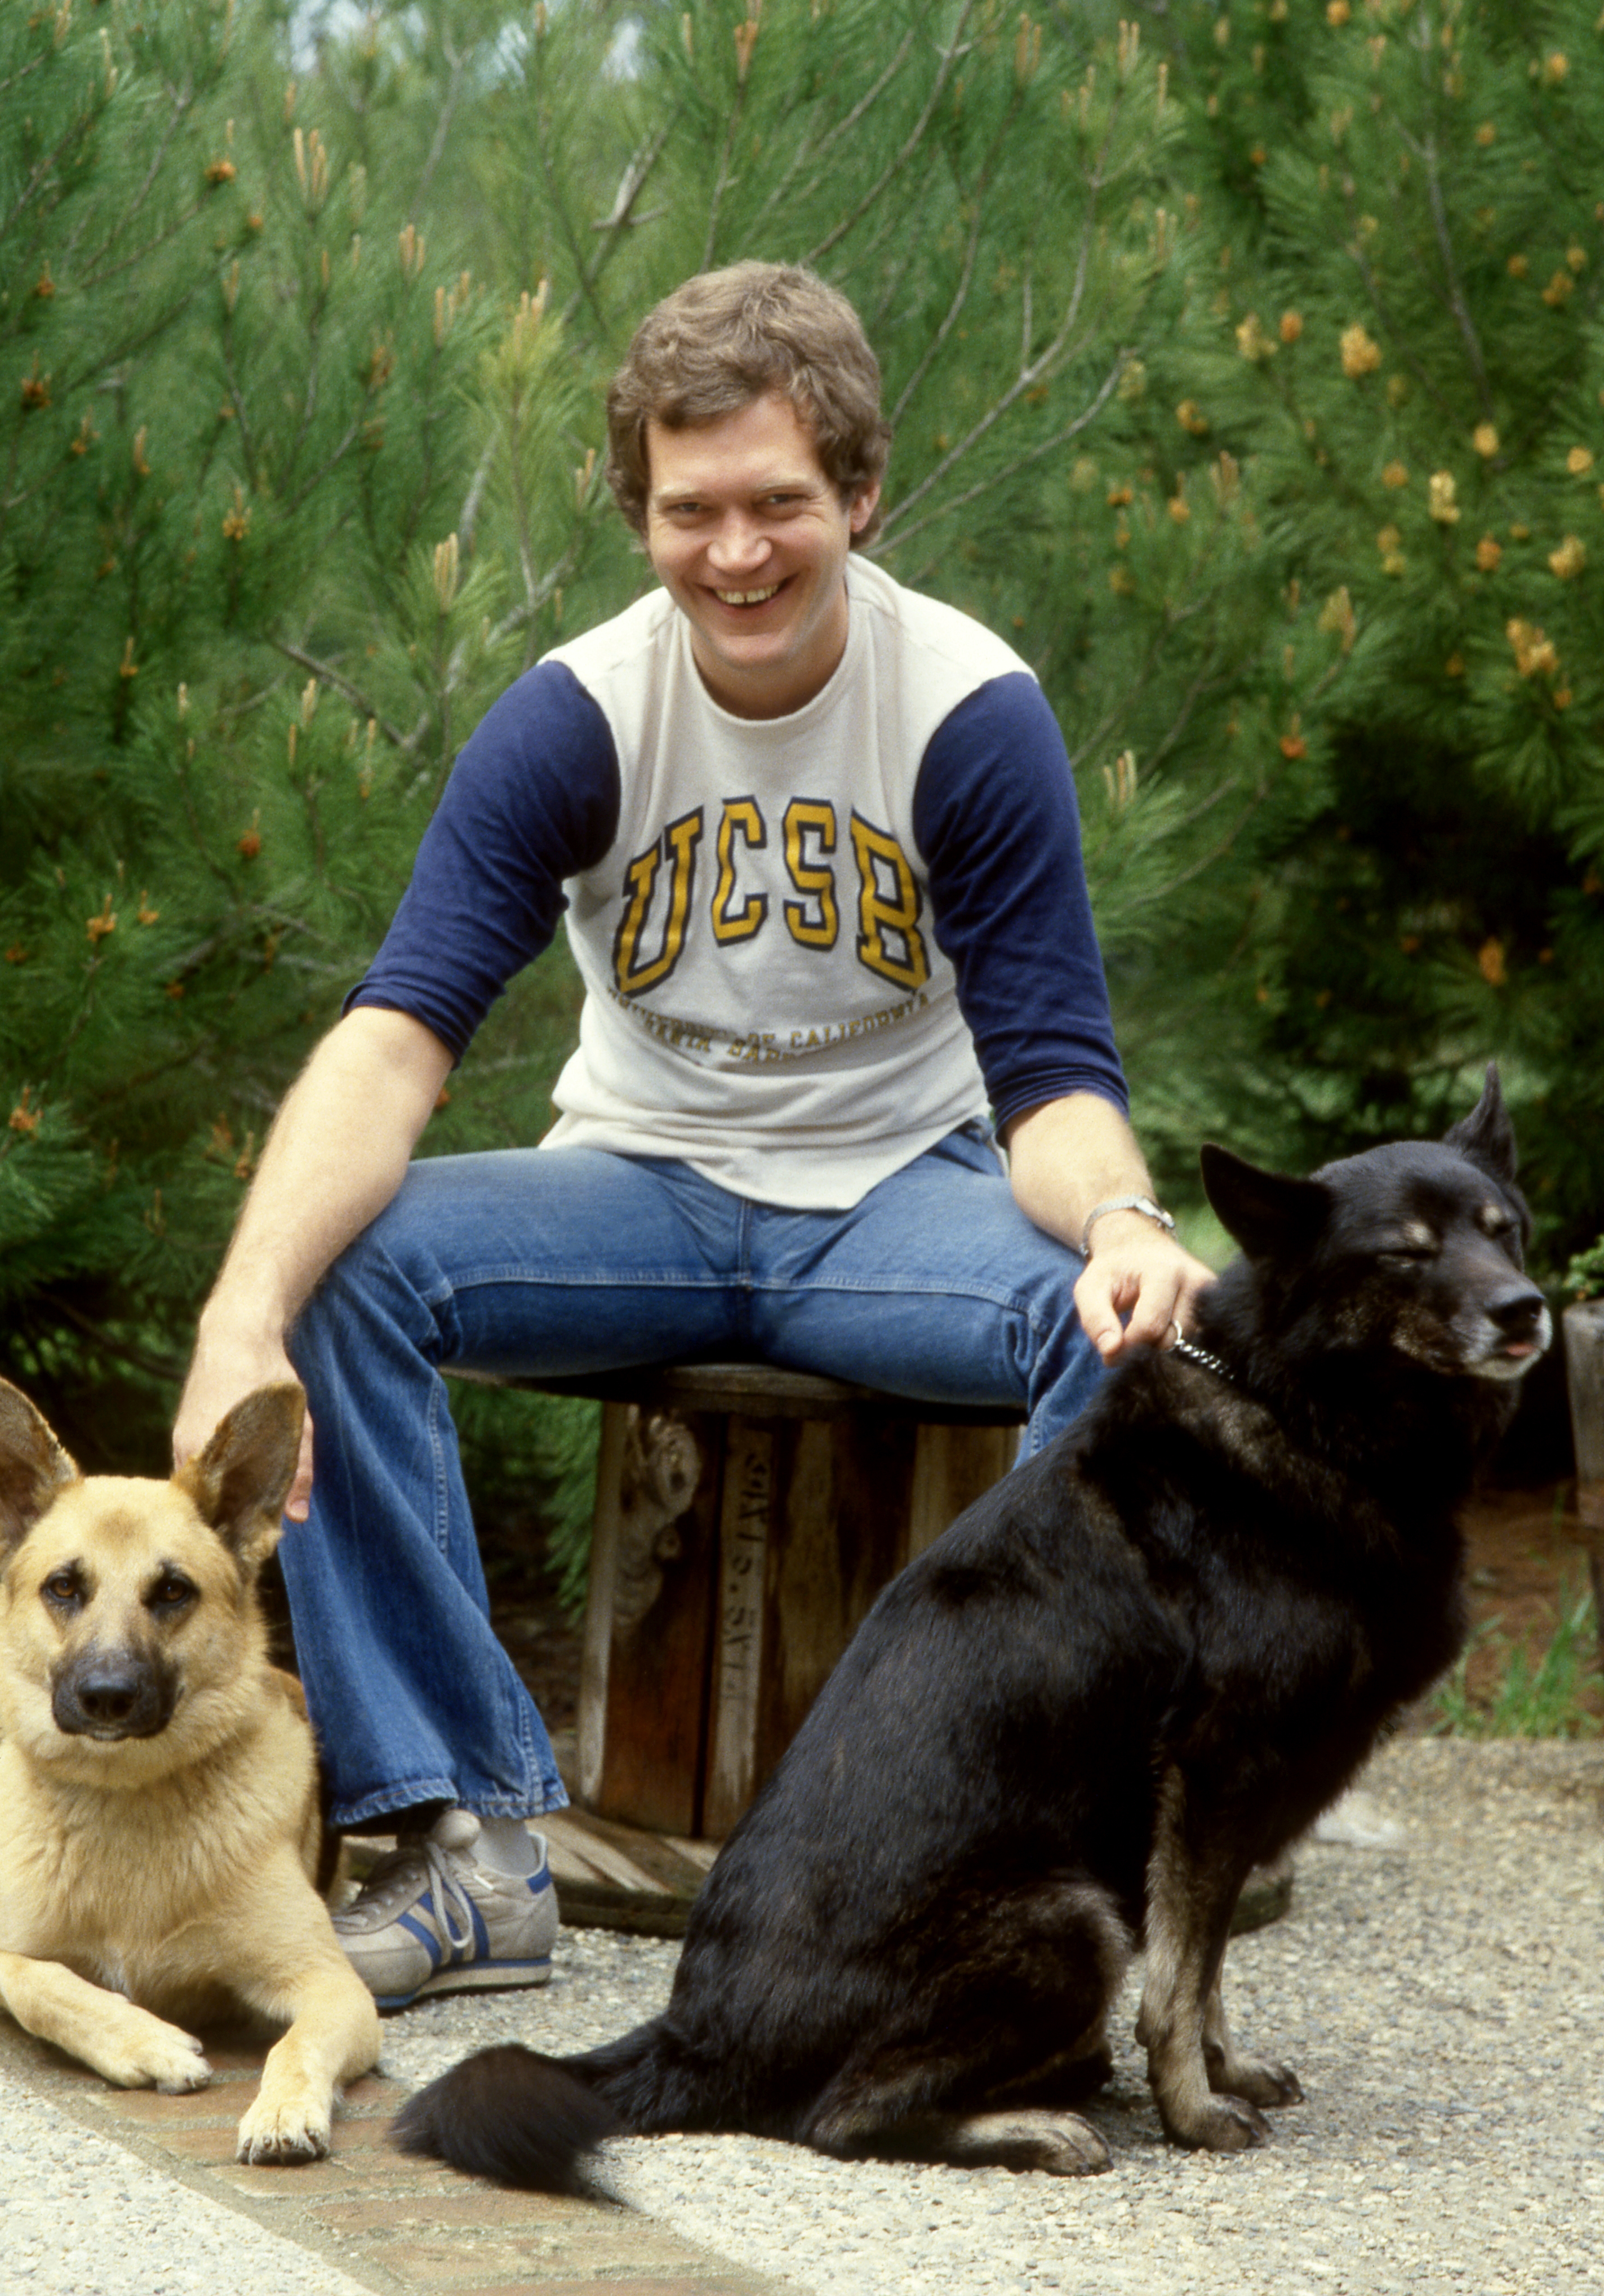 Dave sitting, smiling, and wearing a UCSB T-shirt and jeans in front of two large dogs